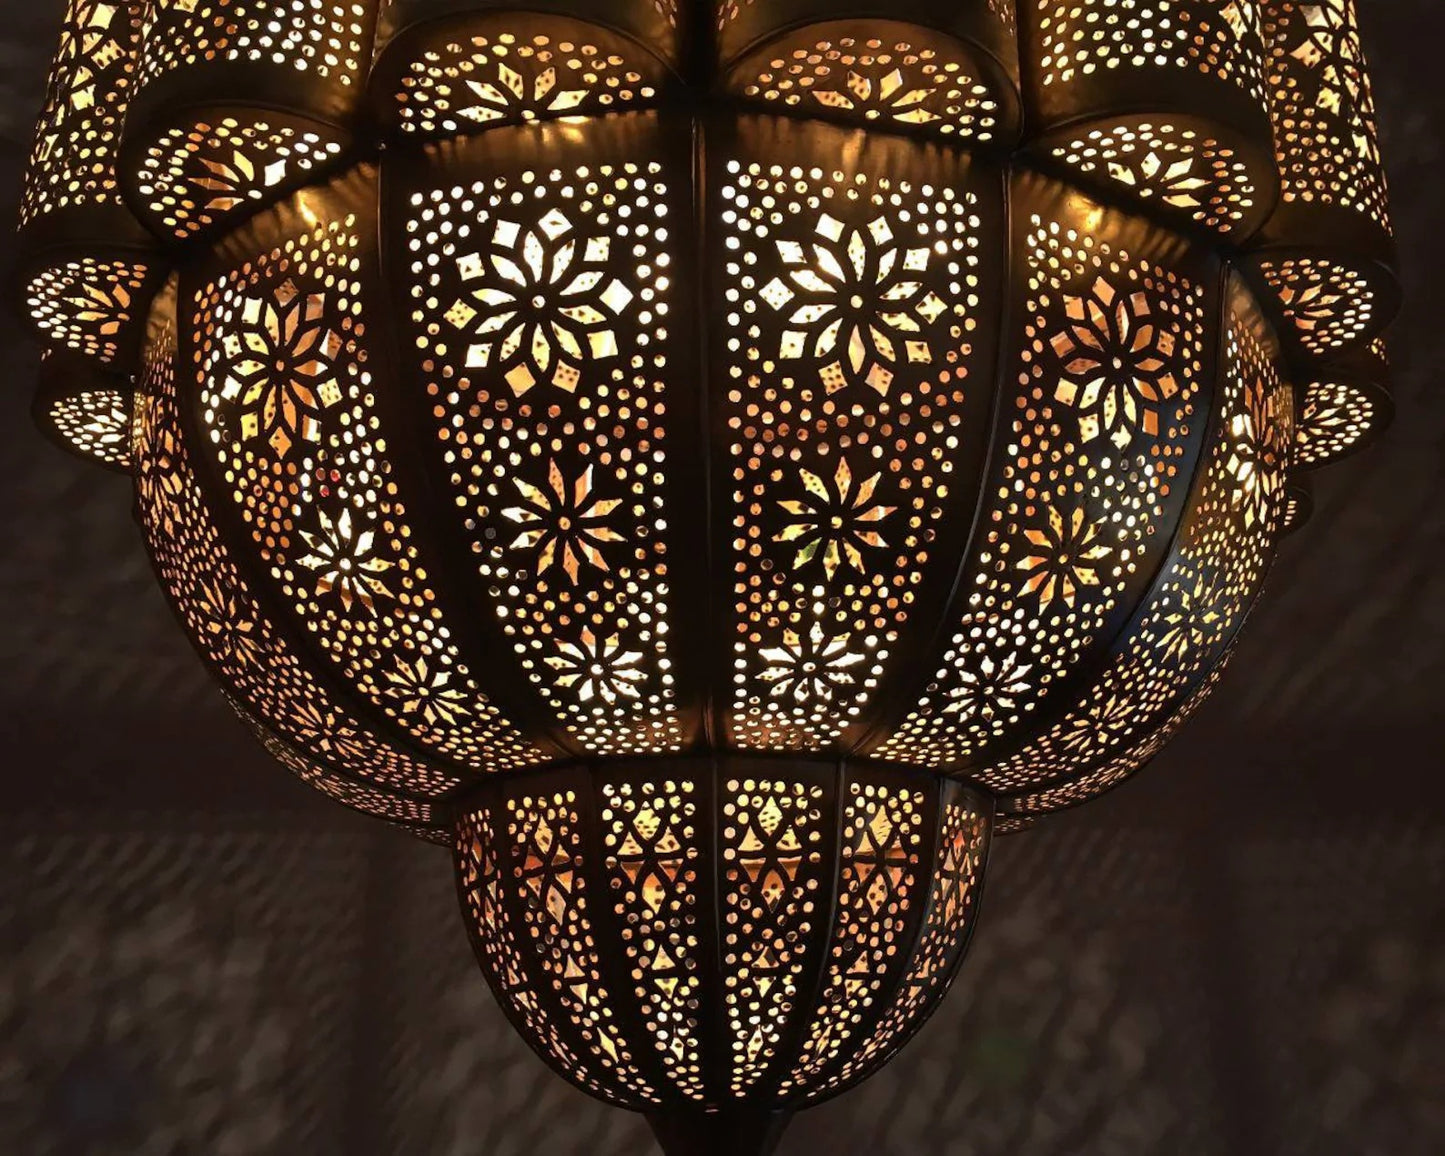 Large Moroccan ceiling Lampshade Lamp, Handmade Pendant Brass Light shade, Moroccan Lampshades, New Home Decor Lighting - Marrakech Lighting